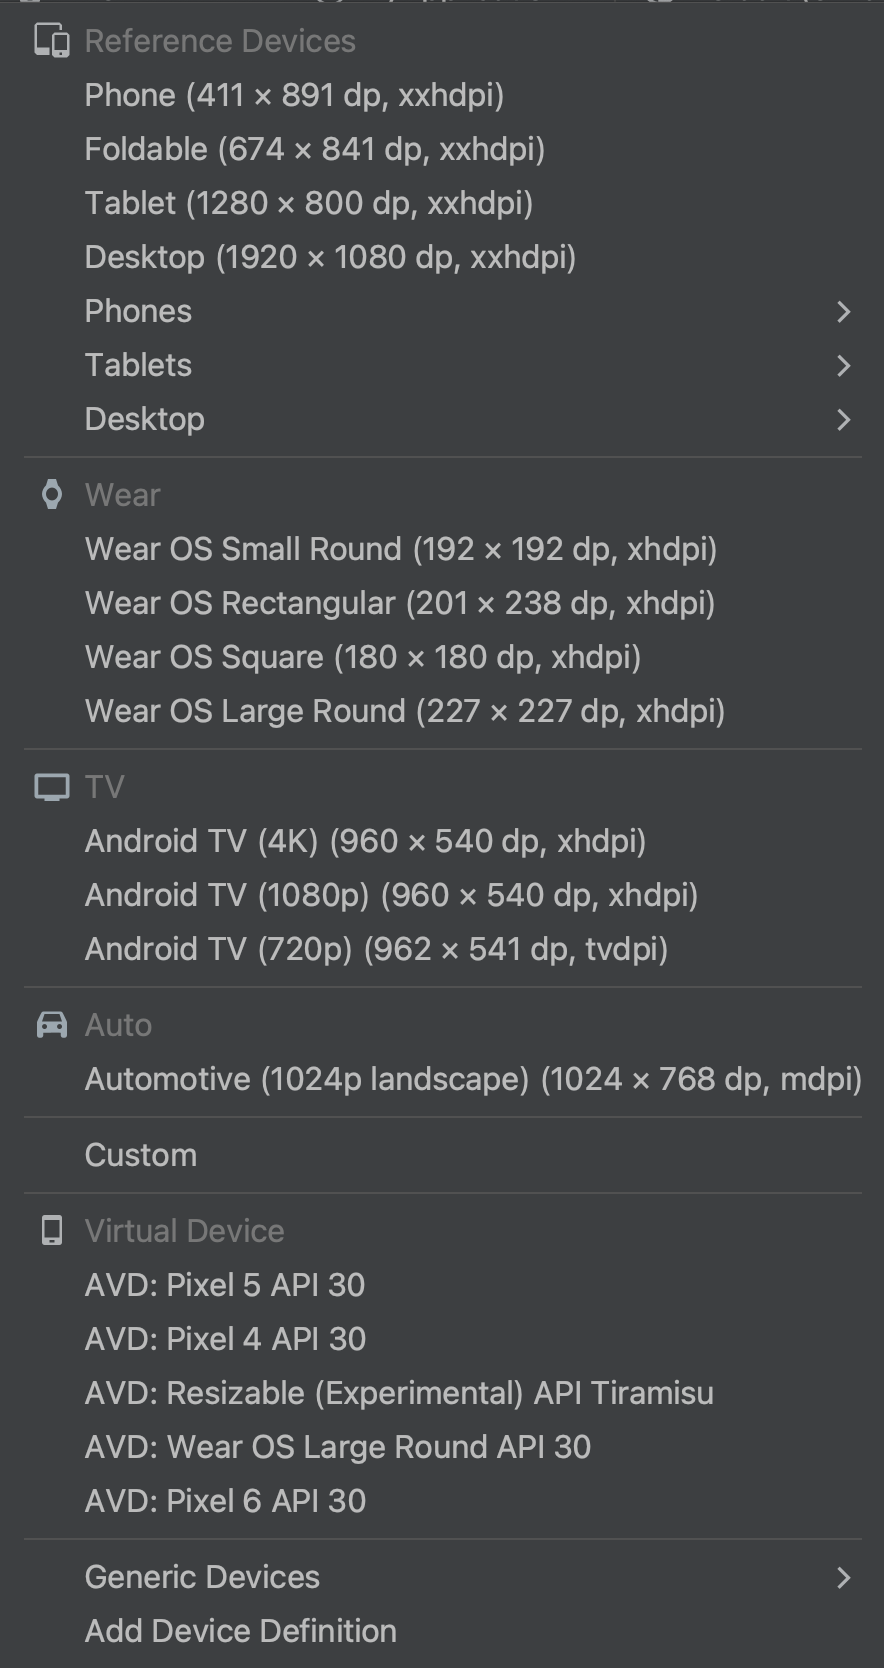 The device list menu with Reference Devices